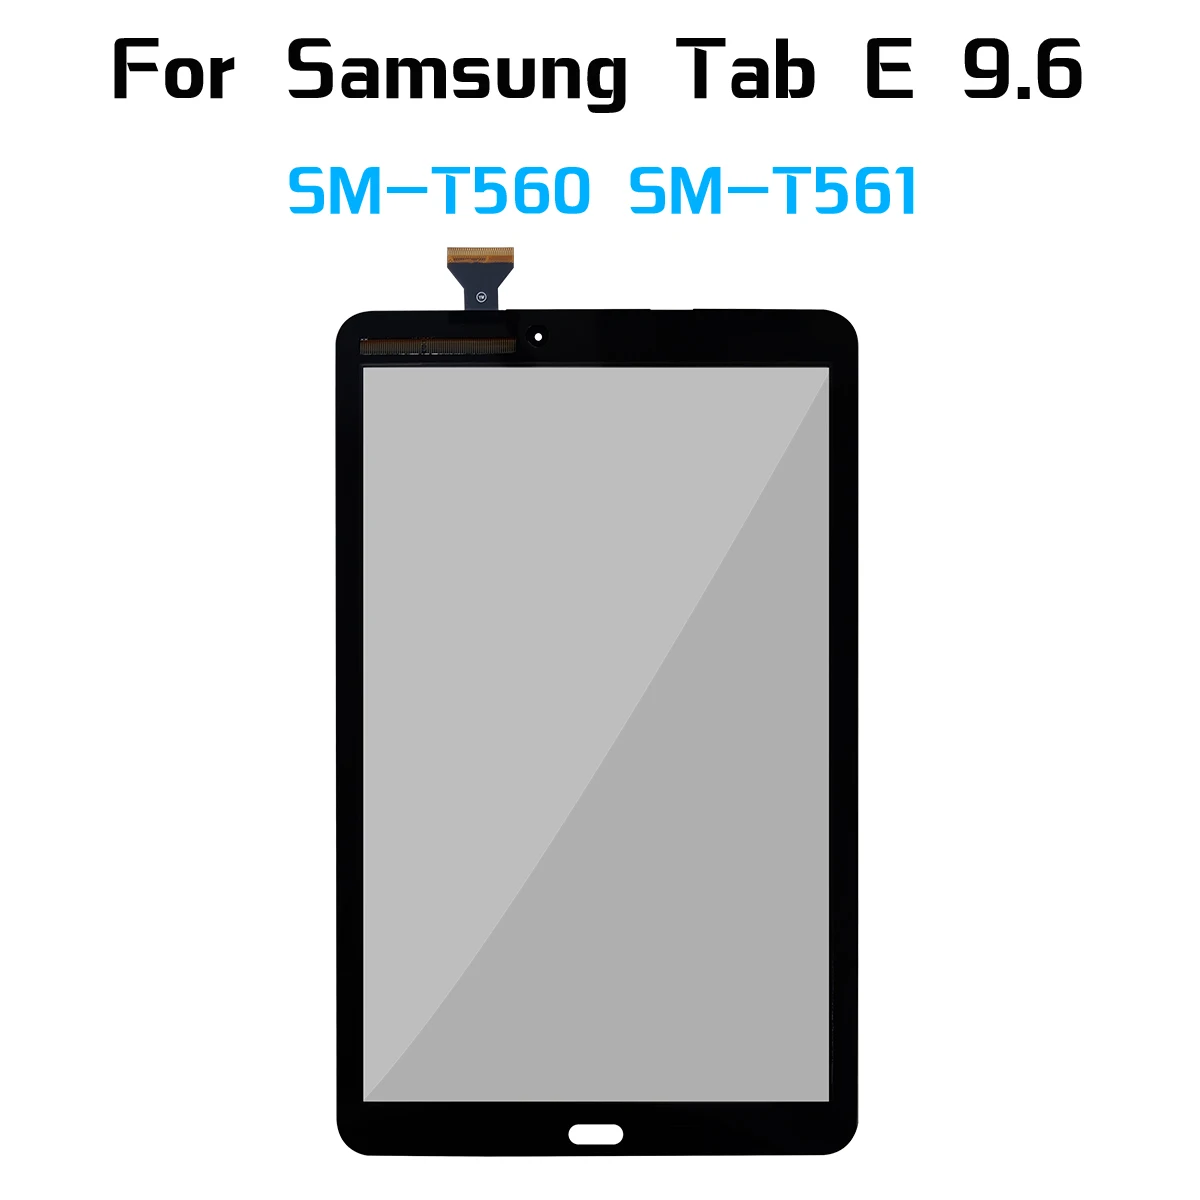 For Samsung Galaxy Tab E 9.6 SM-T560 SM-T561 T560 T561 Touch Screen Digitizer Sensor Glass Panel Tablet Replace